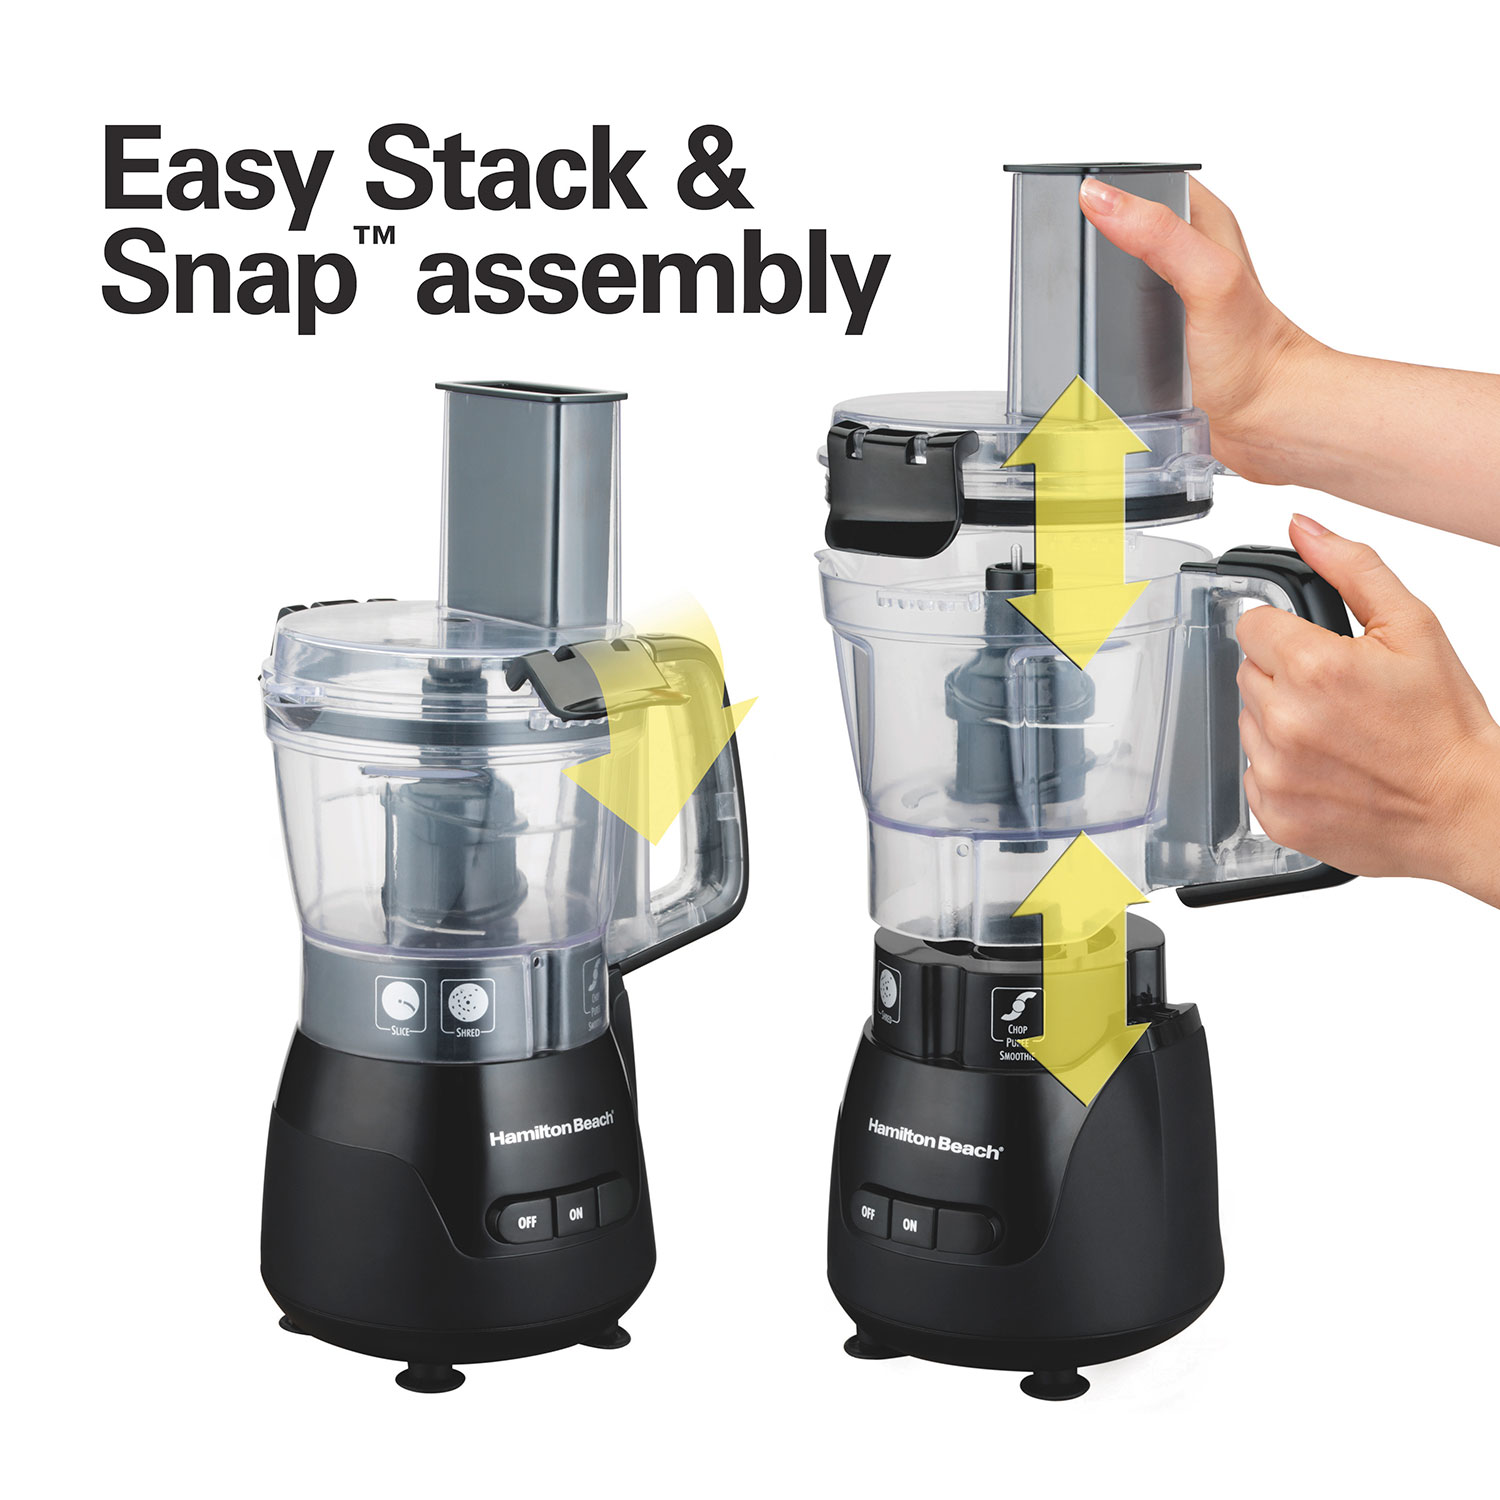 Hamilton Beach 4-Cup Stack  Snap™ Compact Food Processor with Blending  70510